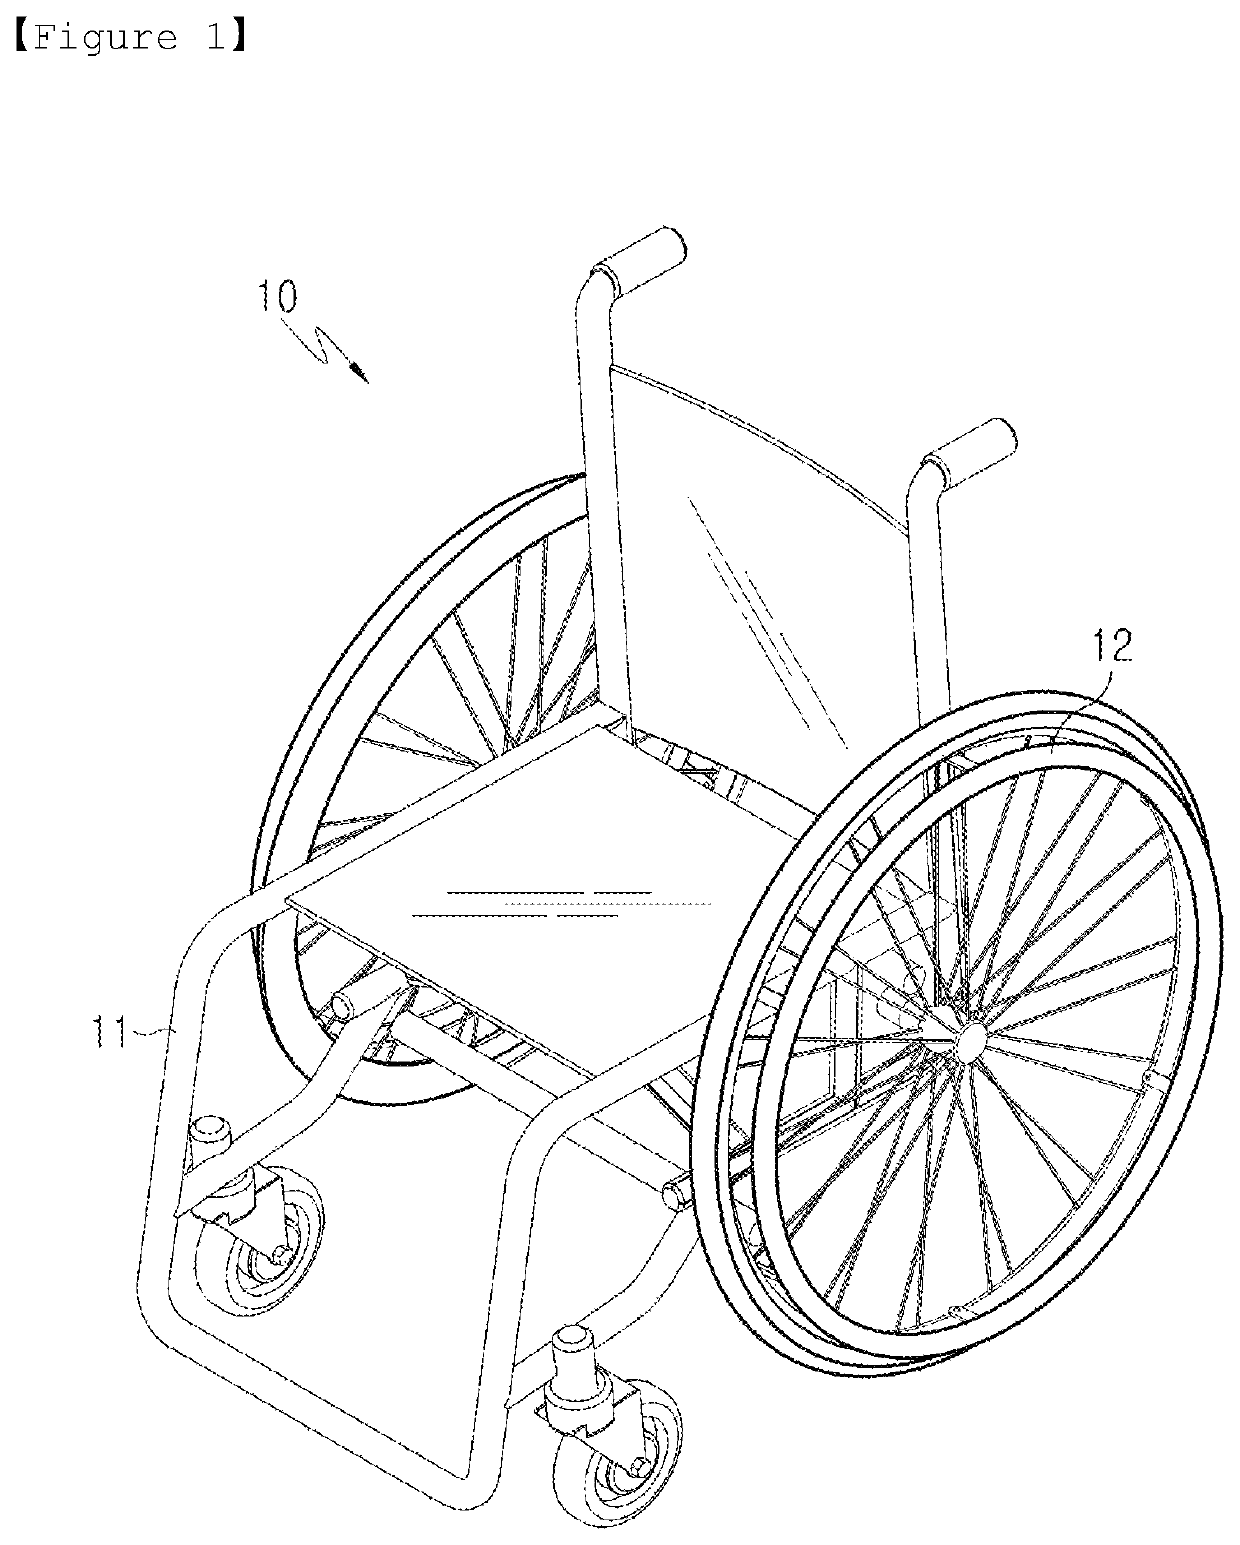 Wheelchair power apparatus for electronic driving conversion